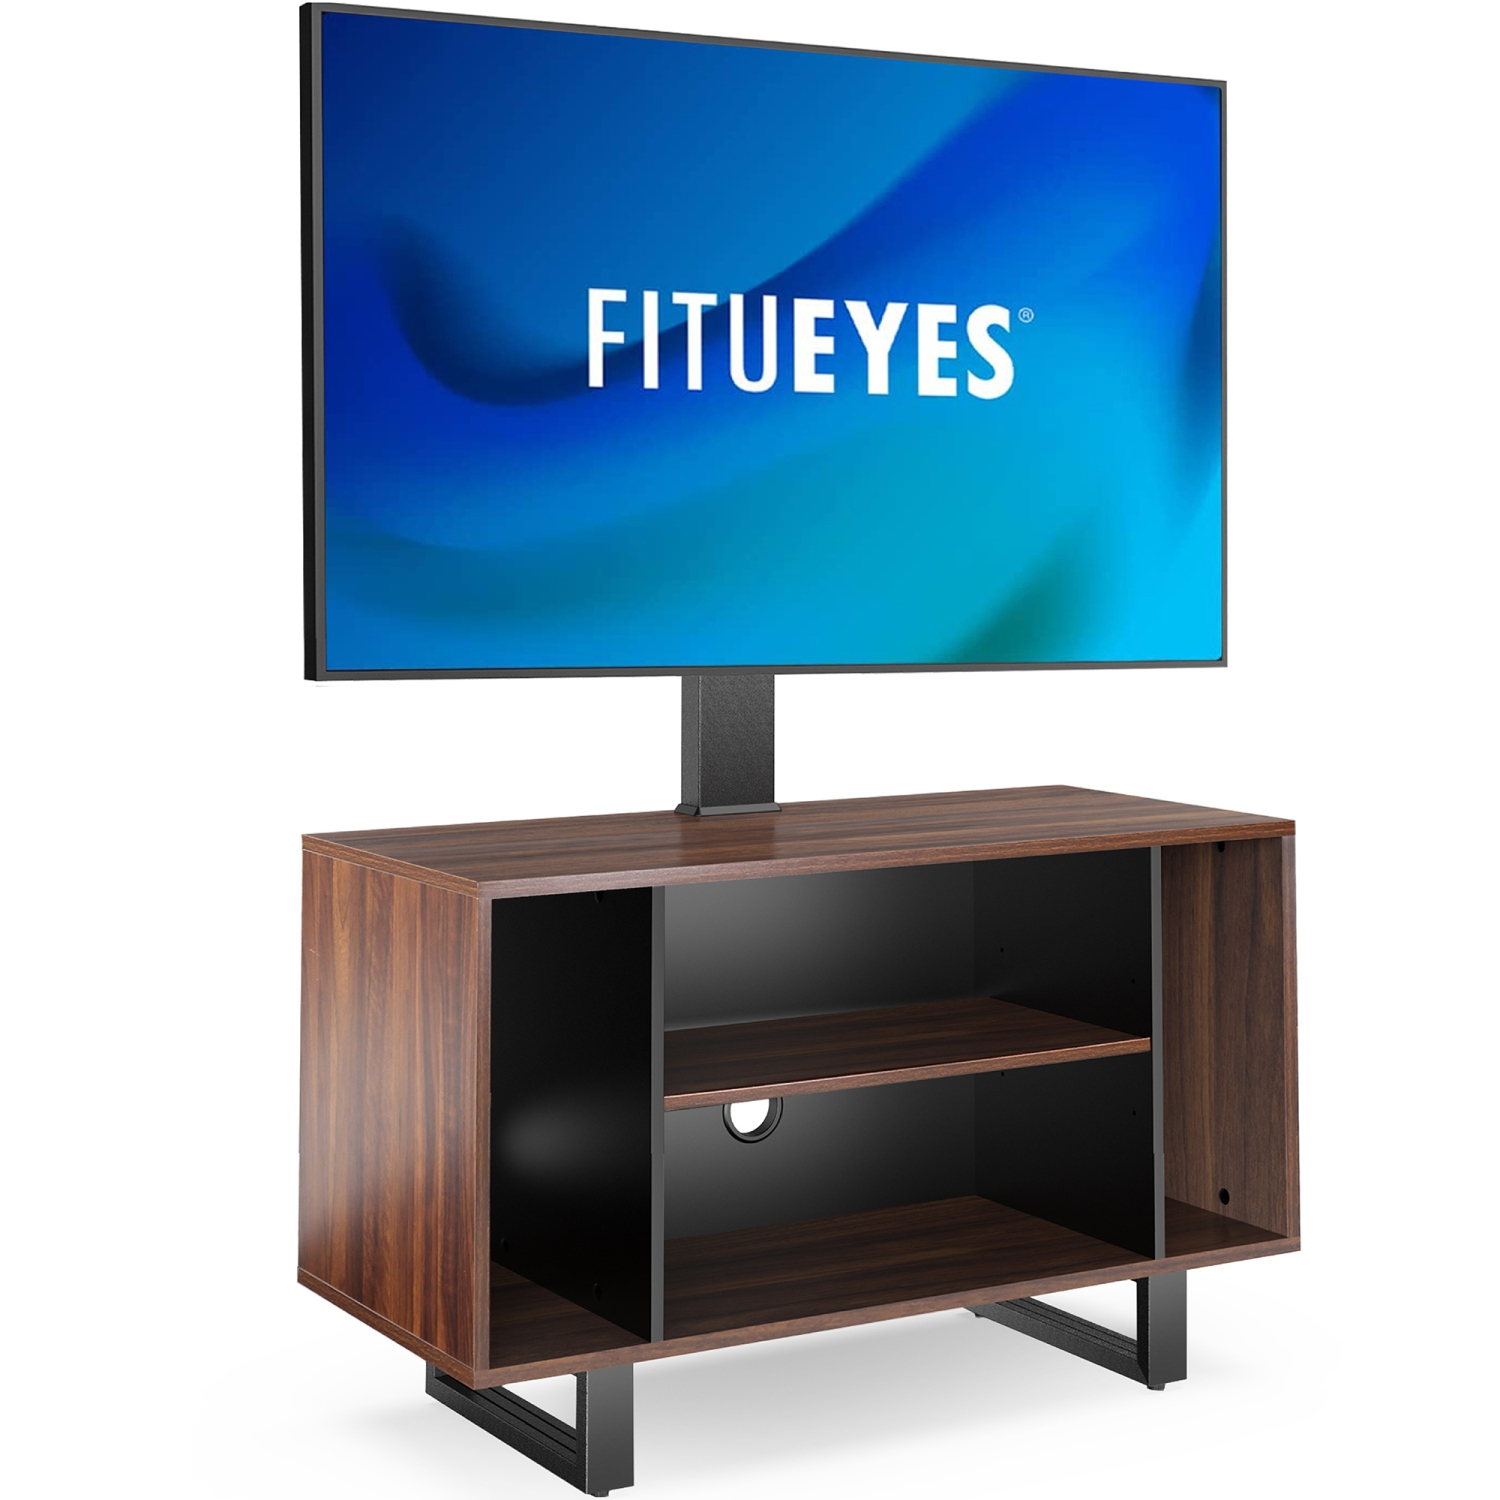 FITUEYES TV Stand Table with Swivel Mount for 32 - 55 Inch TV, TV Storage Cabinet with 3 Tier Wooden Shelves & Height Adjustable Max VESA 400x400mm